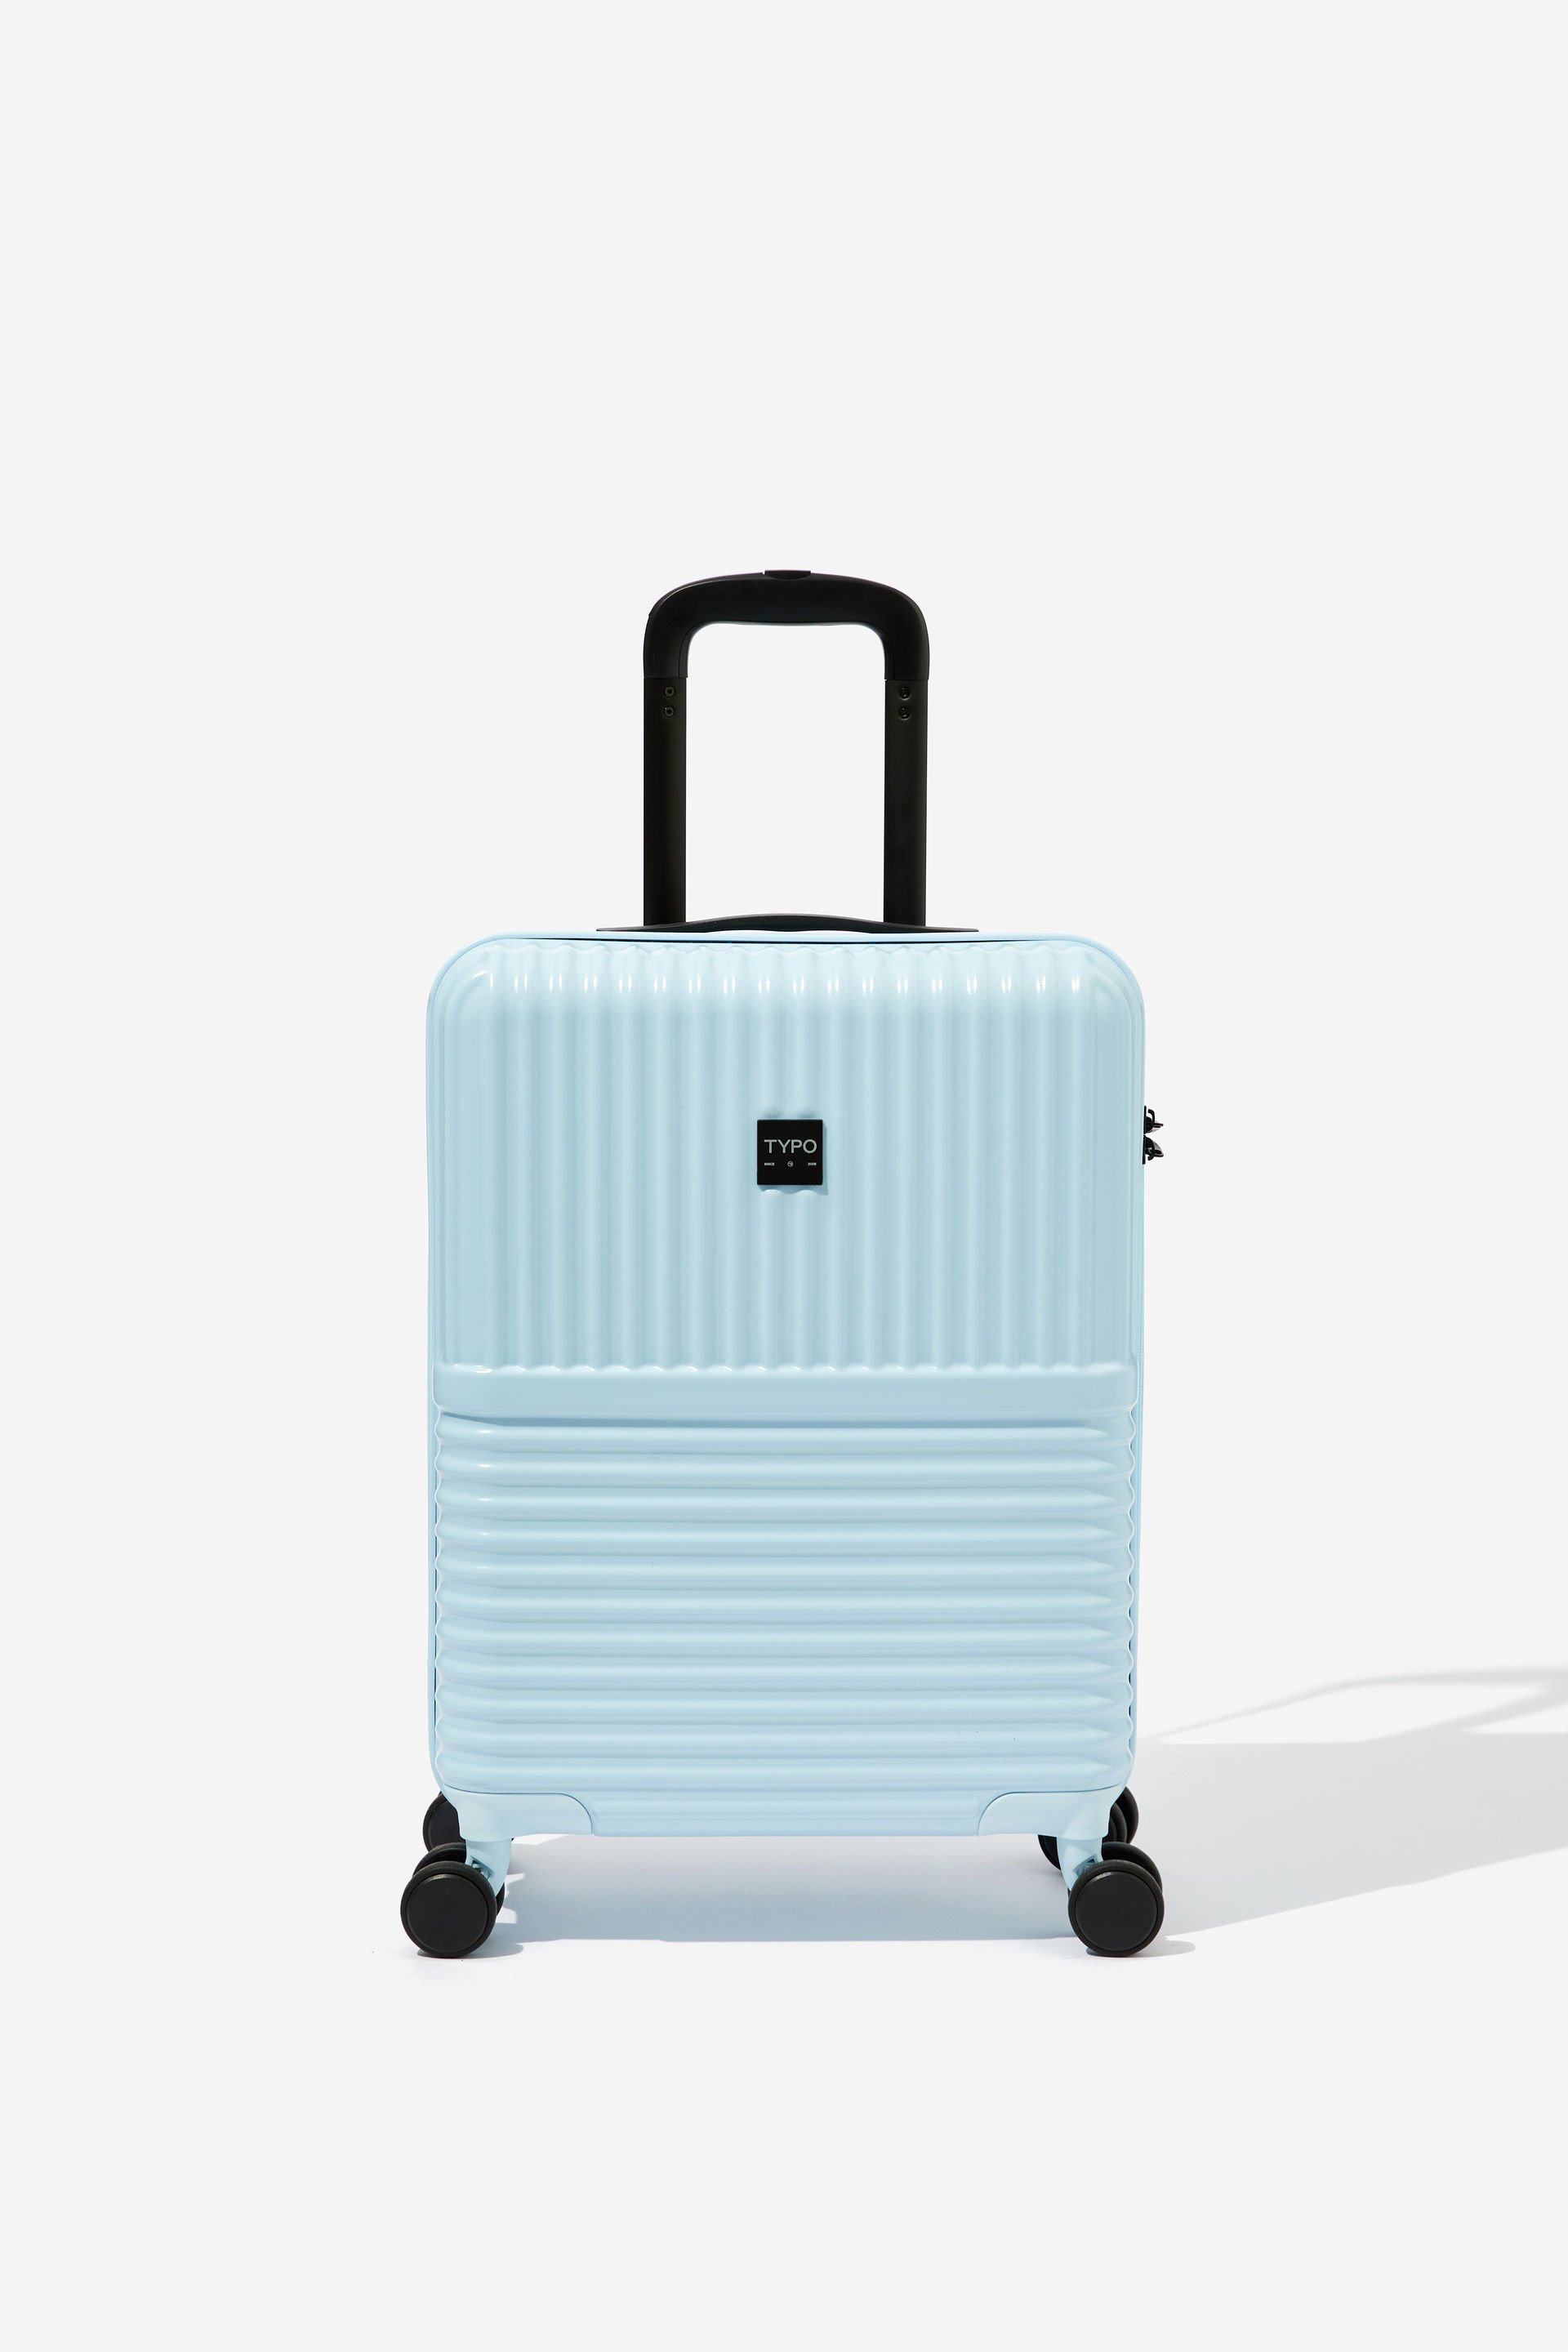 Typo - 20 Inch Carry On Suitcase - Arctic blue